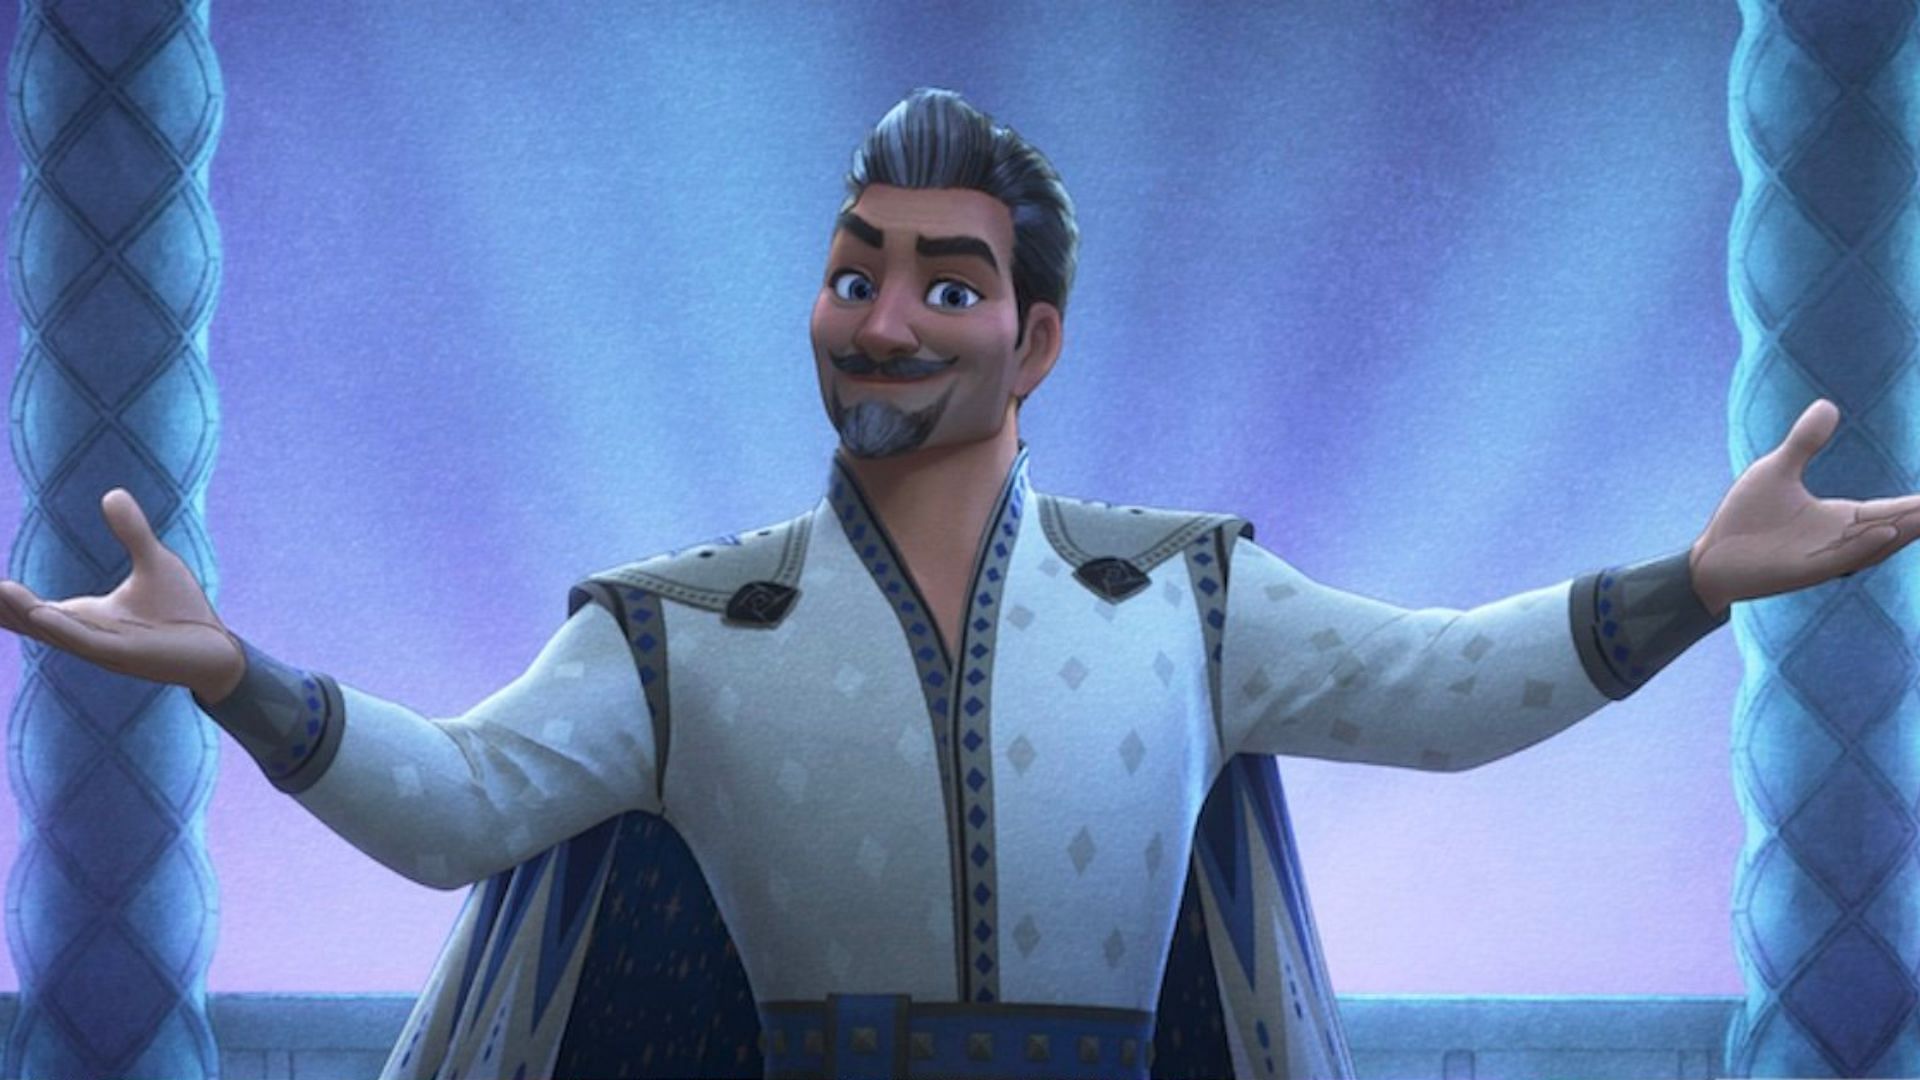 King Magnifico as the antagonist (Image via Disney)